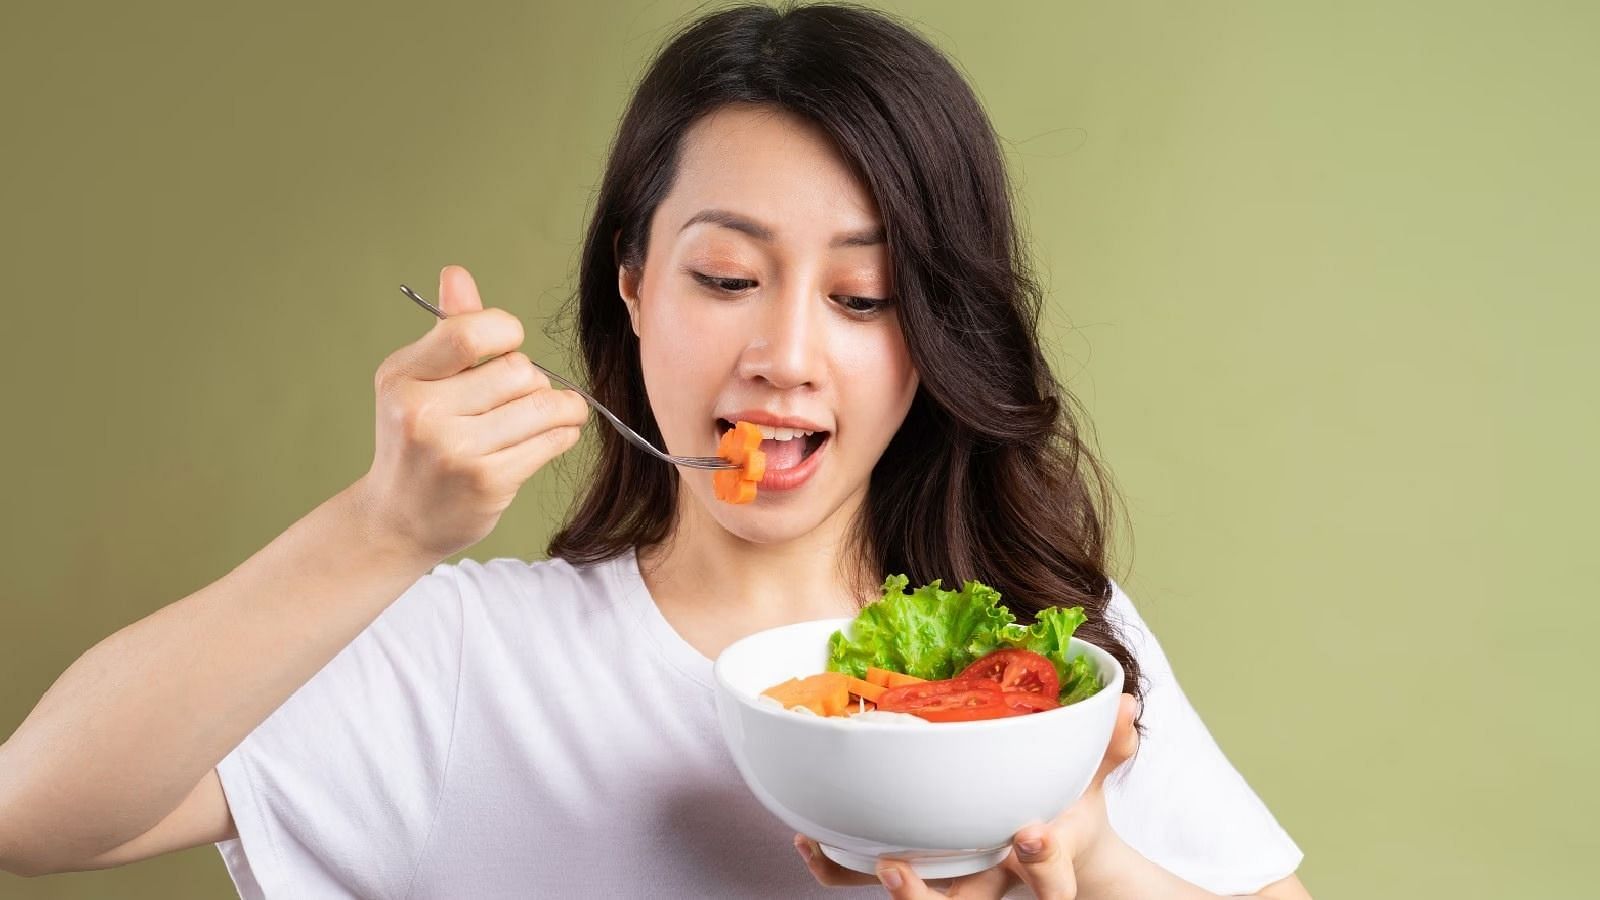 Intuitive Eating (Image via Getty Images)